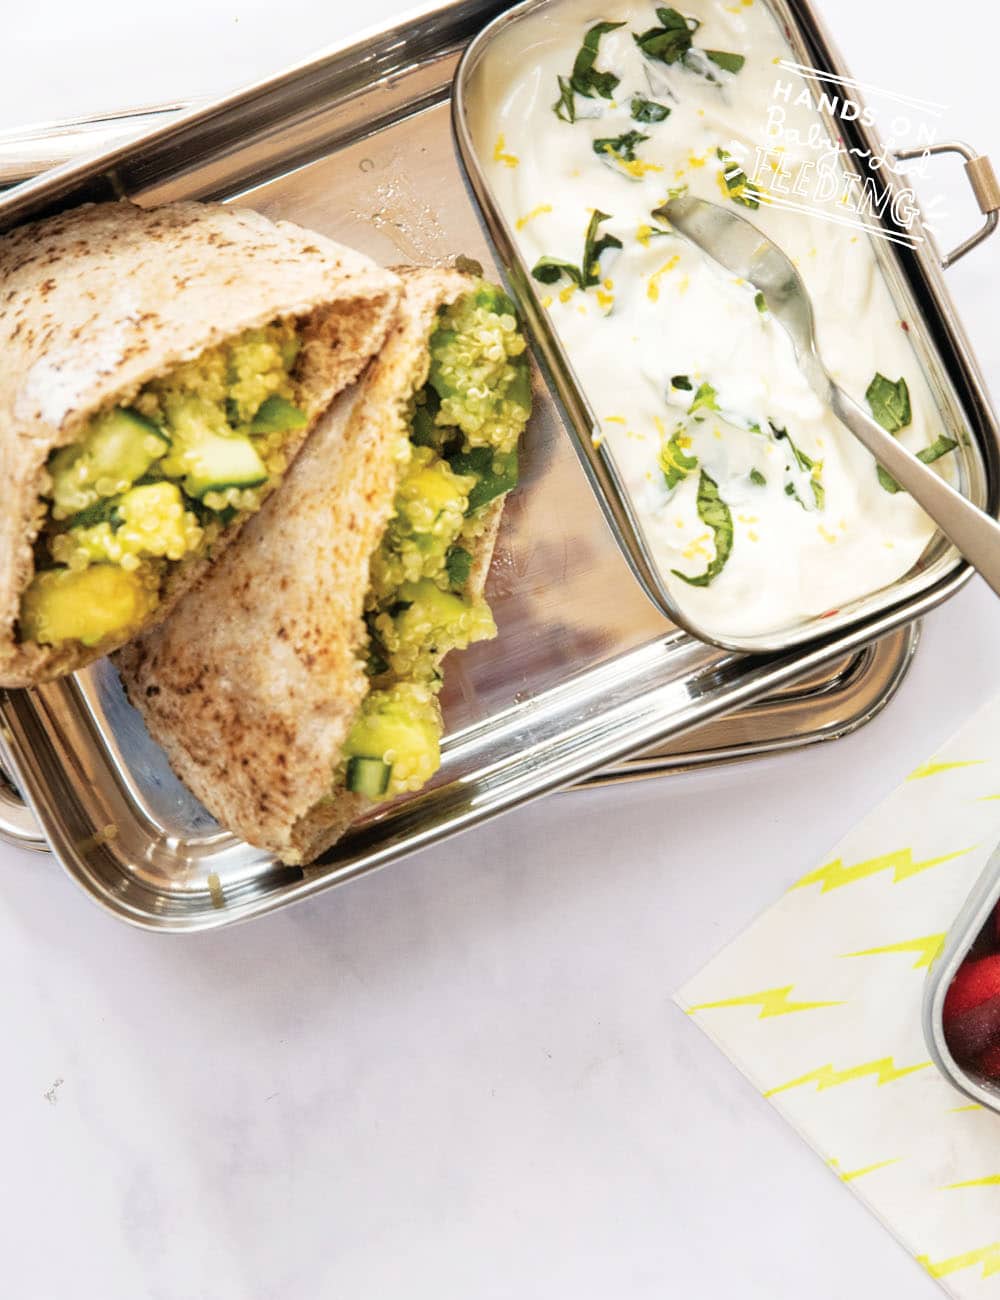 Pitta pockets with quinoa salad and yogurt dip. This is an easy and healthy toddler meal that is full of vegetables. Avocado, cucumber, lemon, and mint flavor this yummy lunch or dinner recipe!